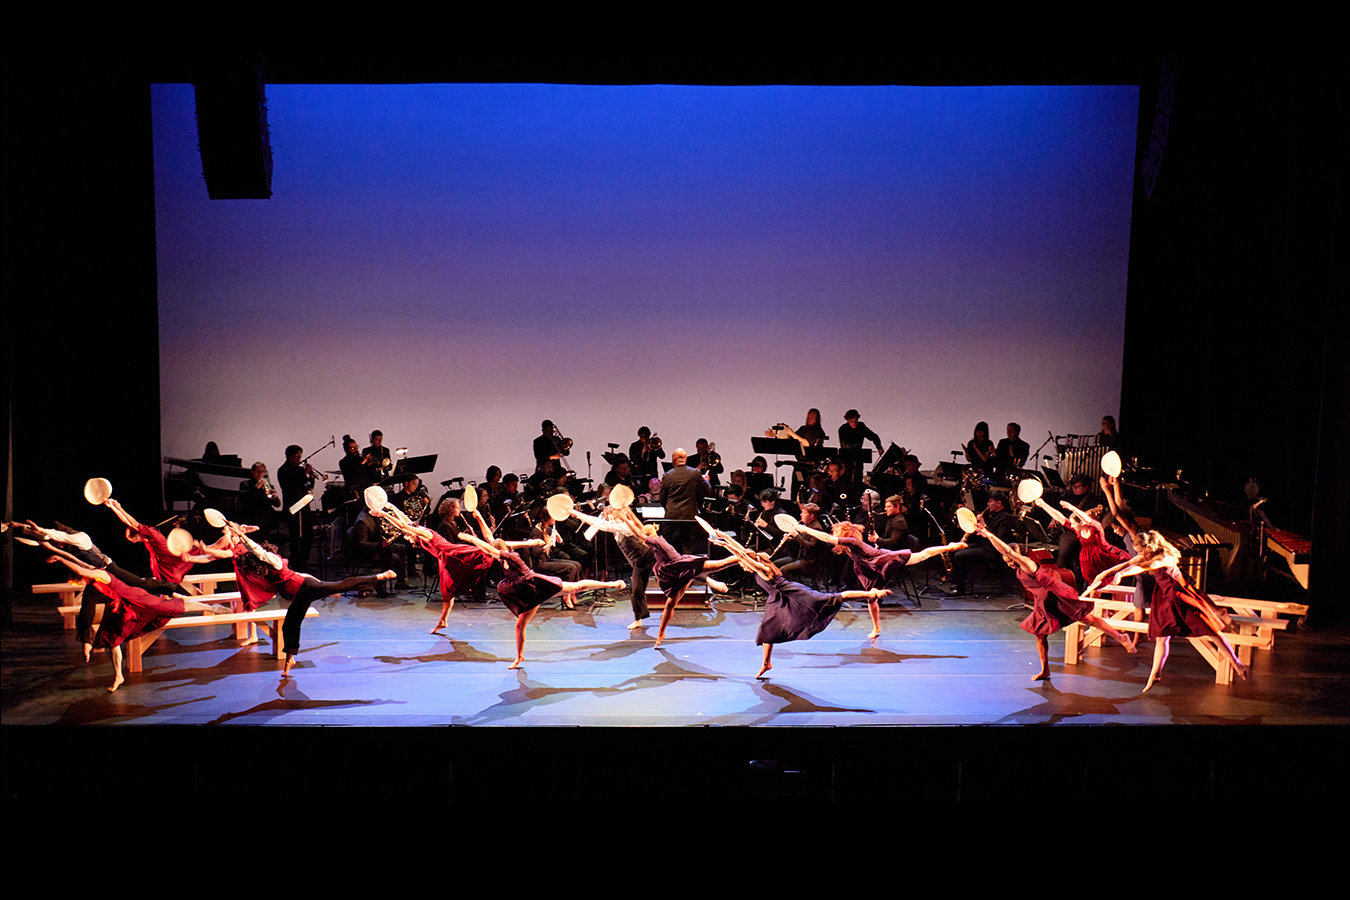 Dancers from Mason's School of Dance perform Professor Lawrence M. Jackson's original choreography to "Come Sunday" by Omar Thomas, performed by the Mason Wind Symphony on February 28. Photo by Will Martinez